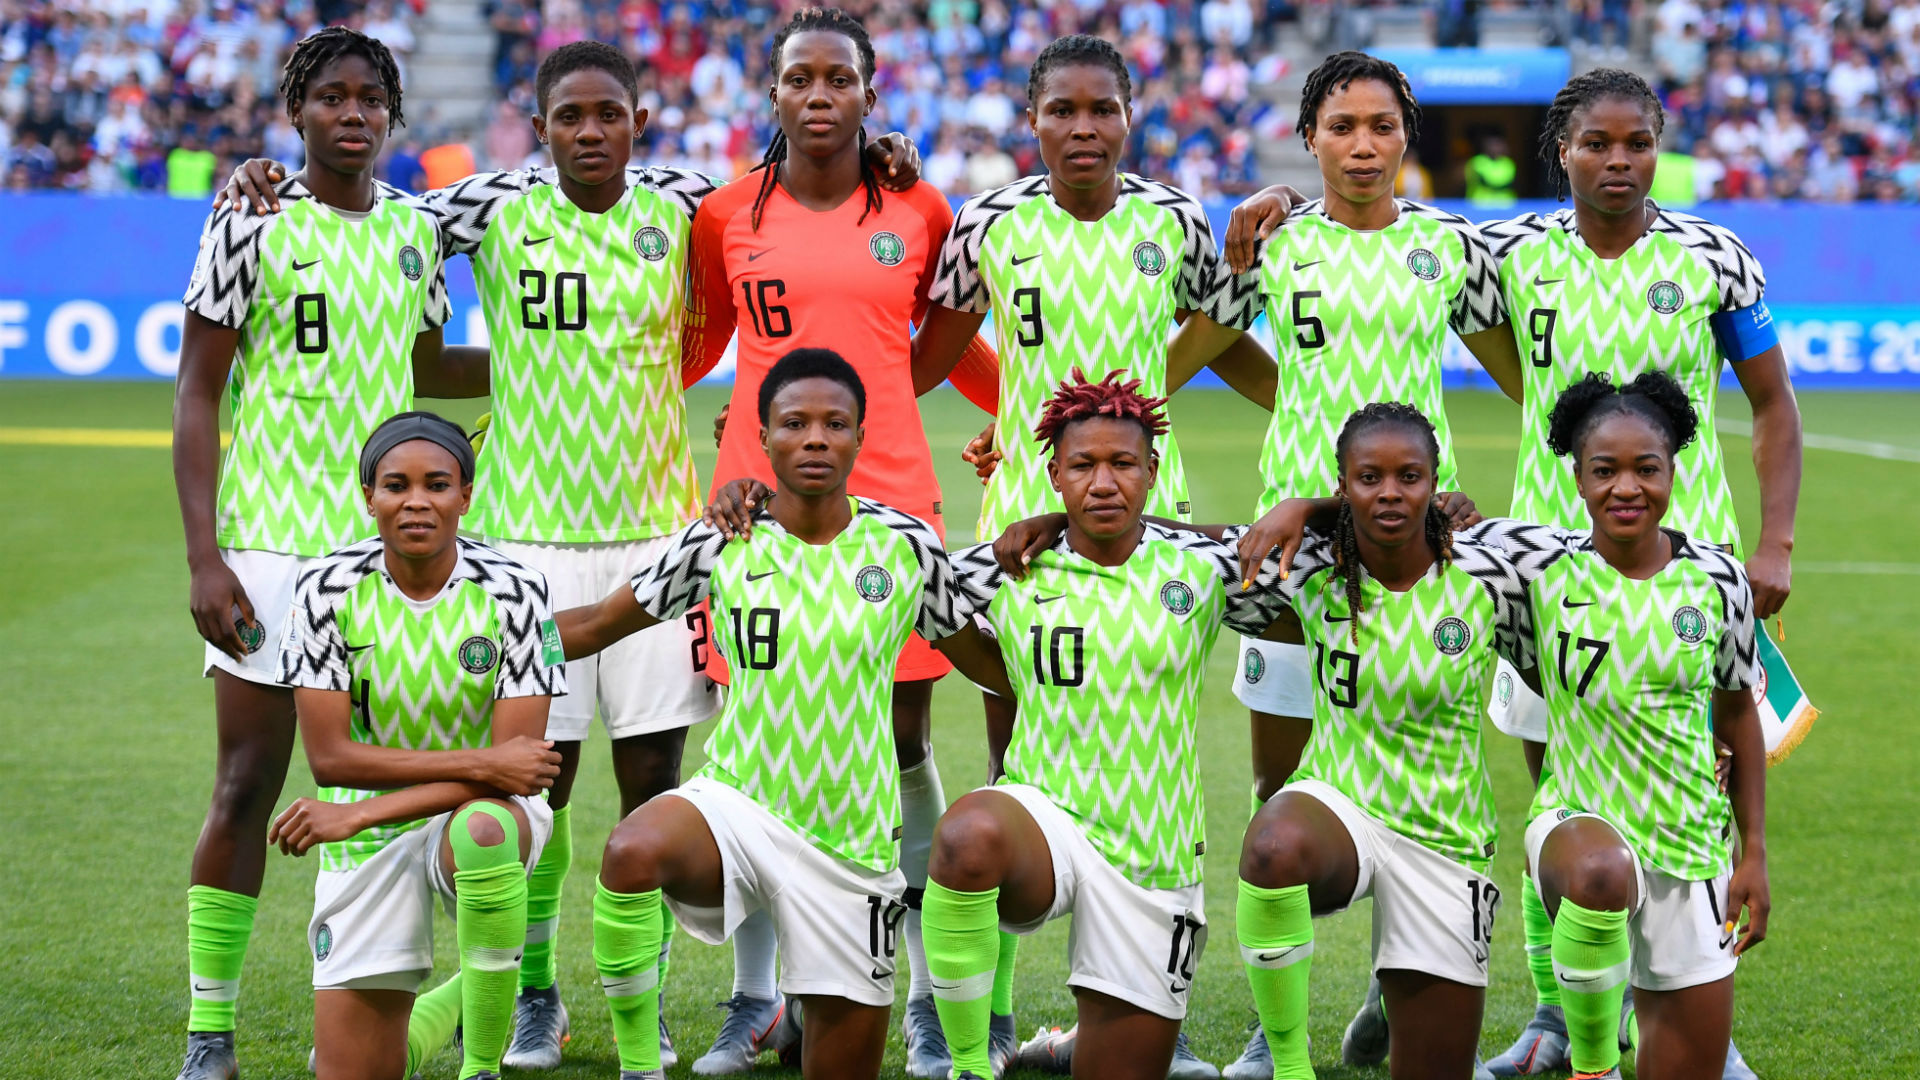 Nigeria battle Australia, Norway and Germany for best Women's World Cup jersey